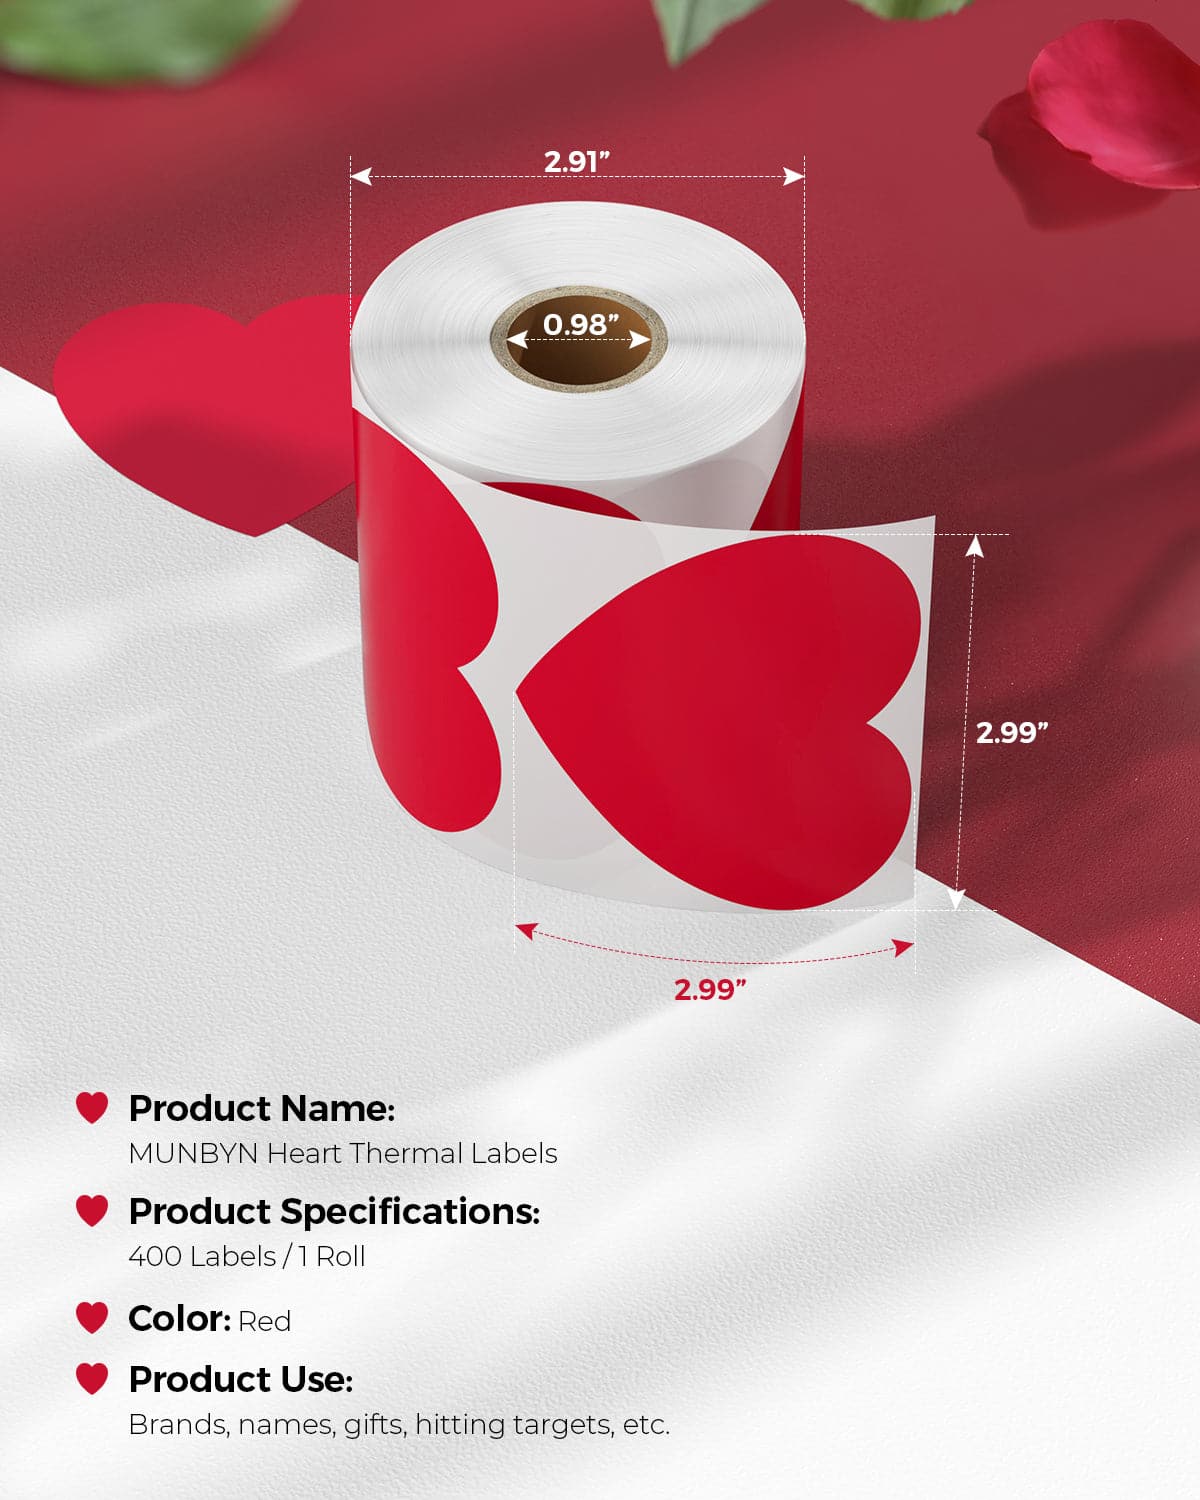 MUNBYN red heart Shaped sticker labels are 400 labels per roll.